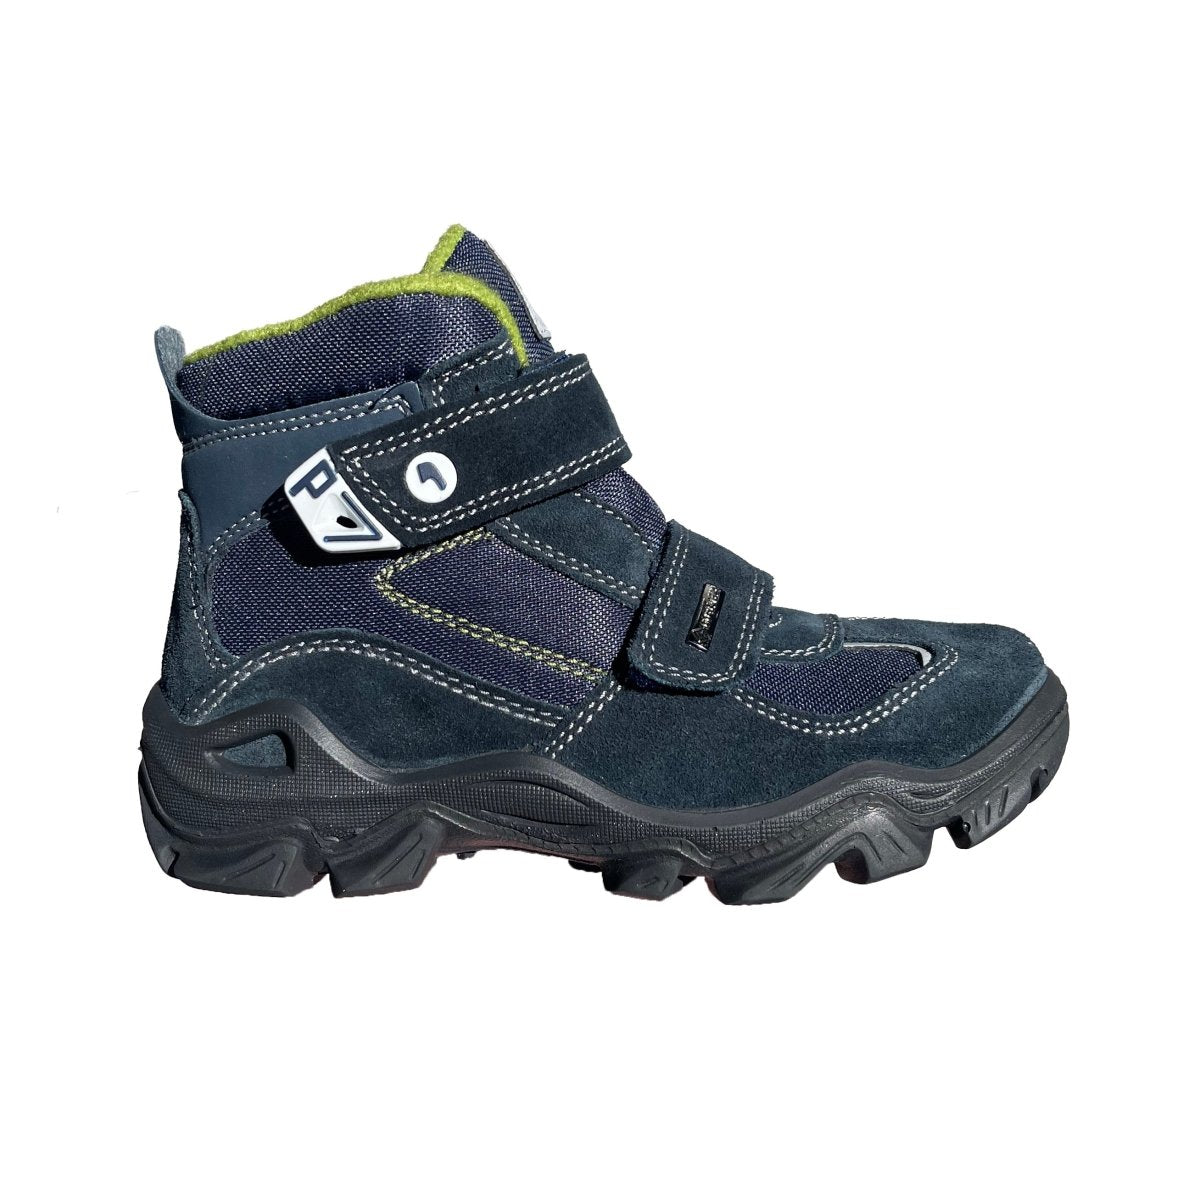 Boy's (Sizes 36-40) Navy/Lime Medium Gore-Tex Boot - Tip Top Shoes New York